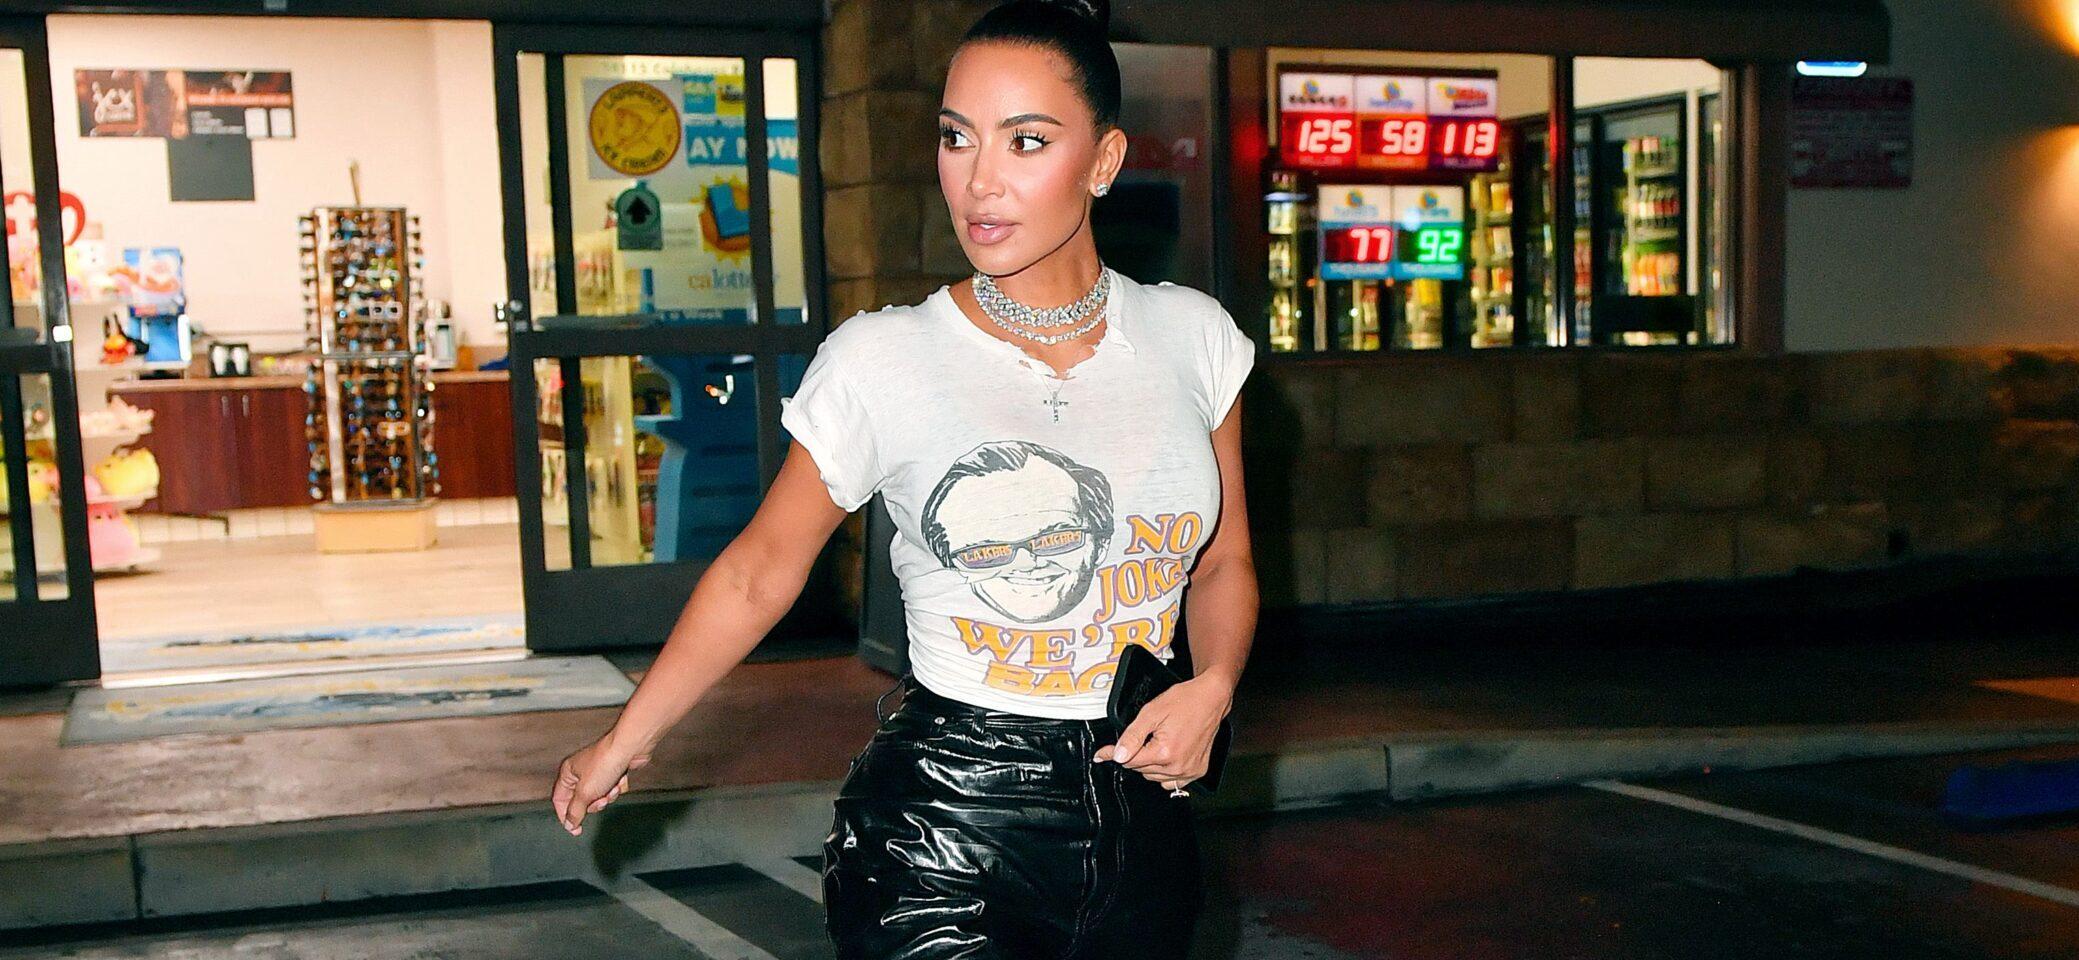 Kim Kardashian wears a special Jack Nicholson Lakers t shirt as she is happy after watching them win to get to the Western Conference Finals as she leaves a gas station in LA